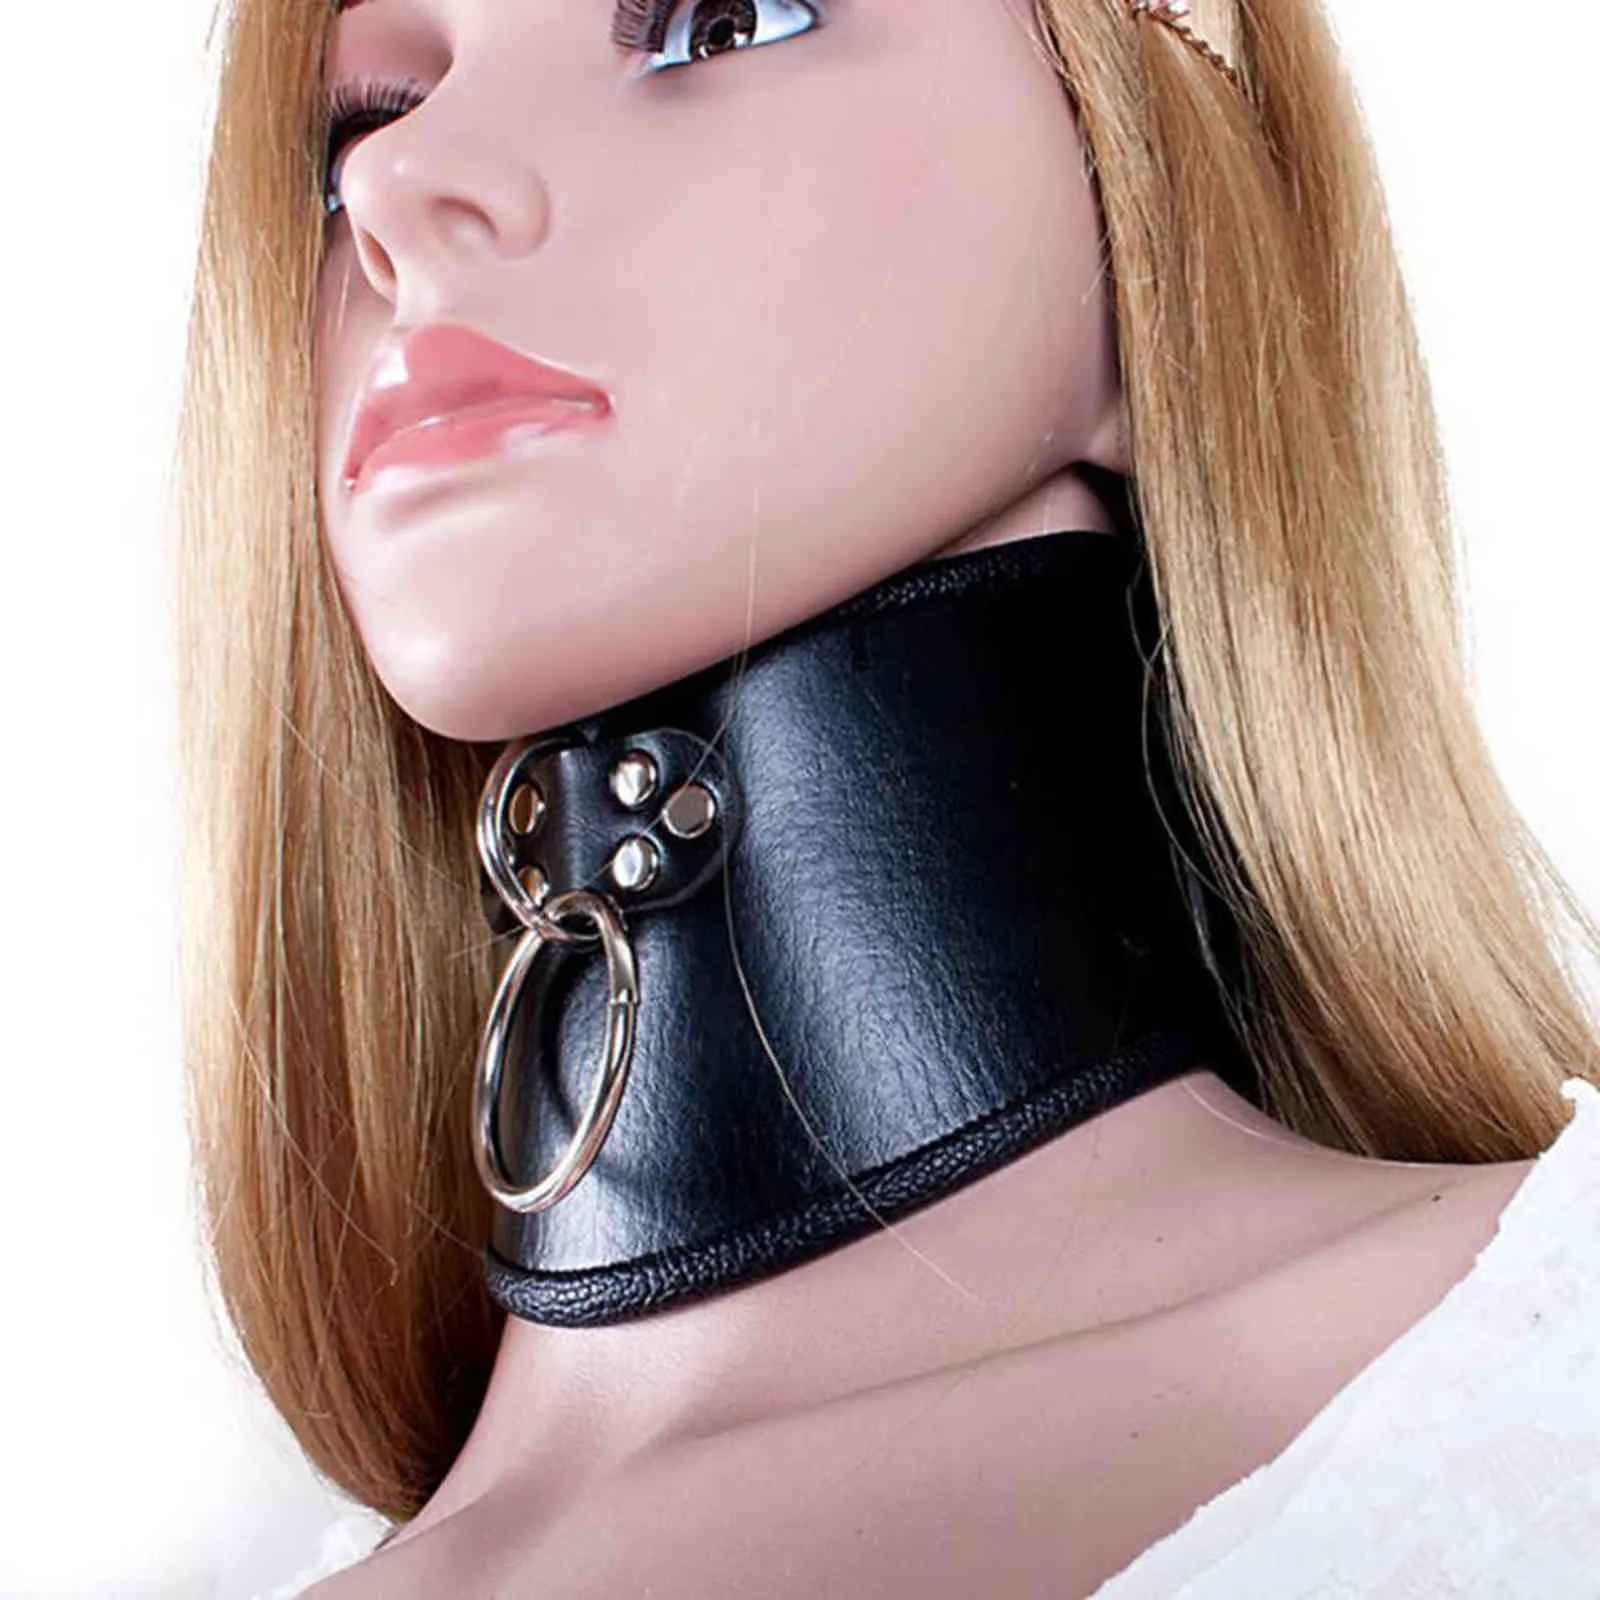 NXYSm bondage camaTech PU Leather Posture Neck Collar With Chain Leash BDSM Slave Rings Chastity Harness Bondage Sex Toys For Couples 1126